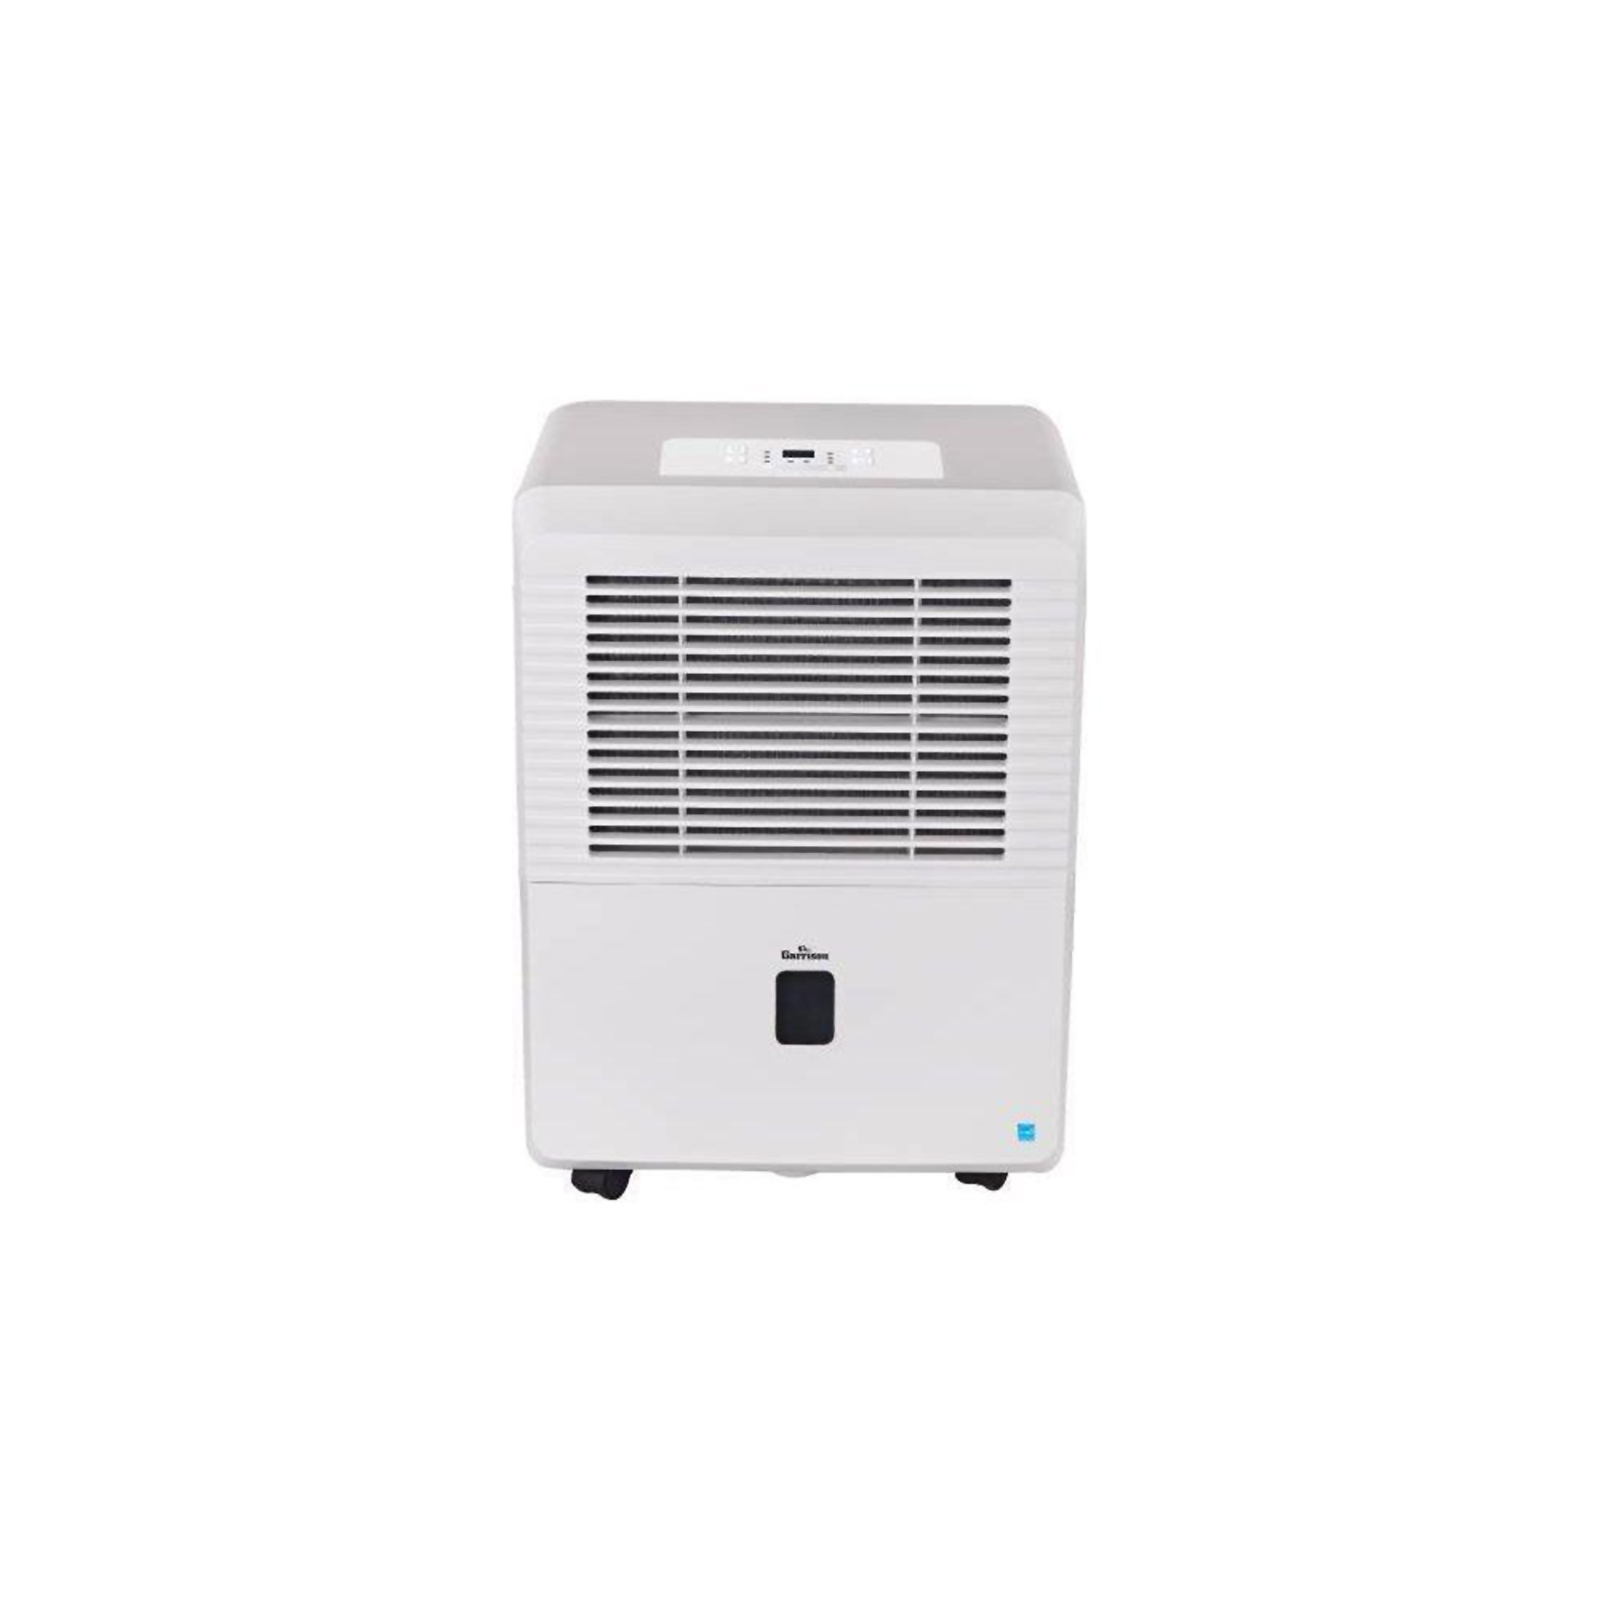 Garrison 1028312  60pt Energy Star Dehumidifier with Washable Filter - White